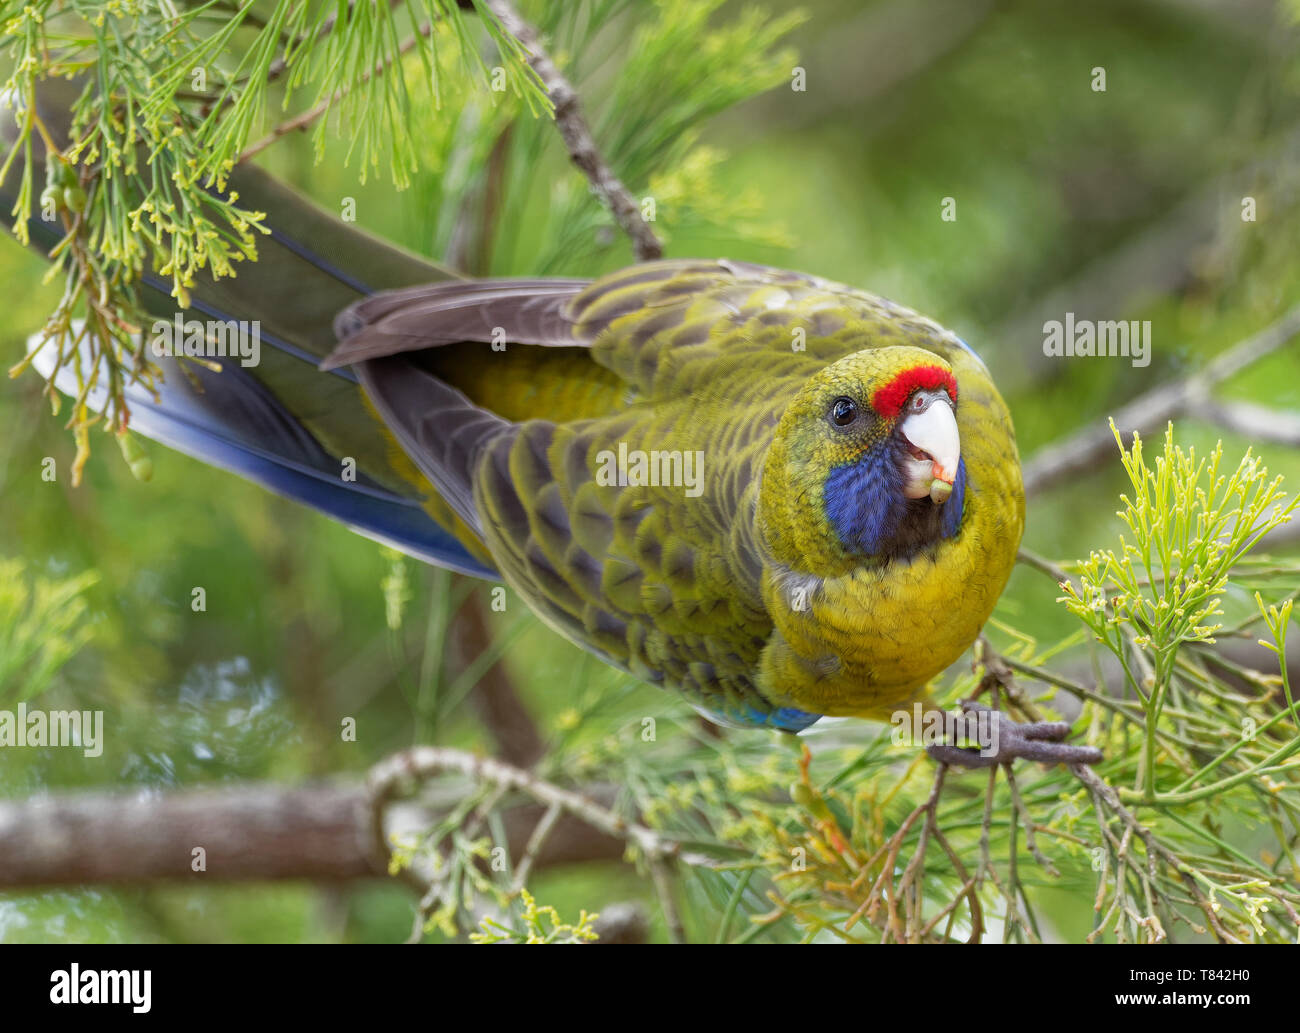 Green Rosella - Platycercus caledonicus or Tasmanian rosella is a species of parrot native to Tasmania and Bass Strait islands. Stock Photo